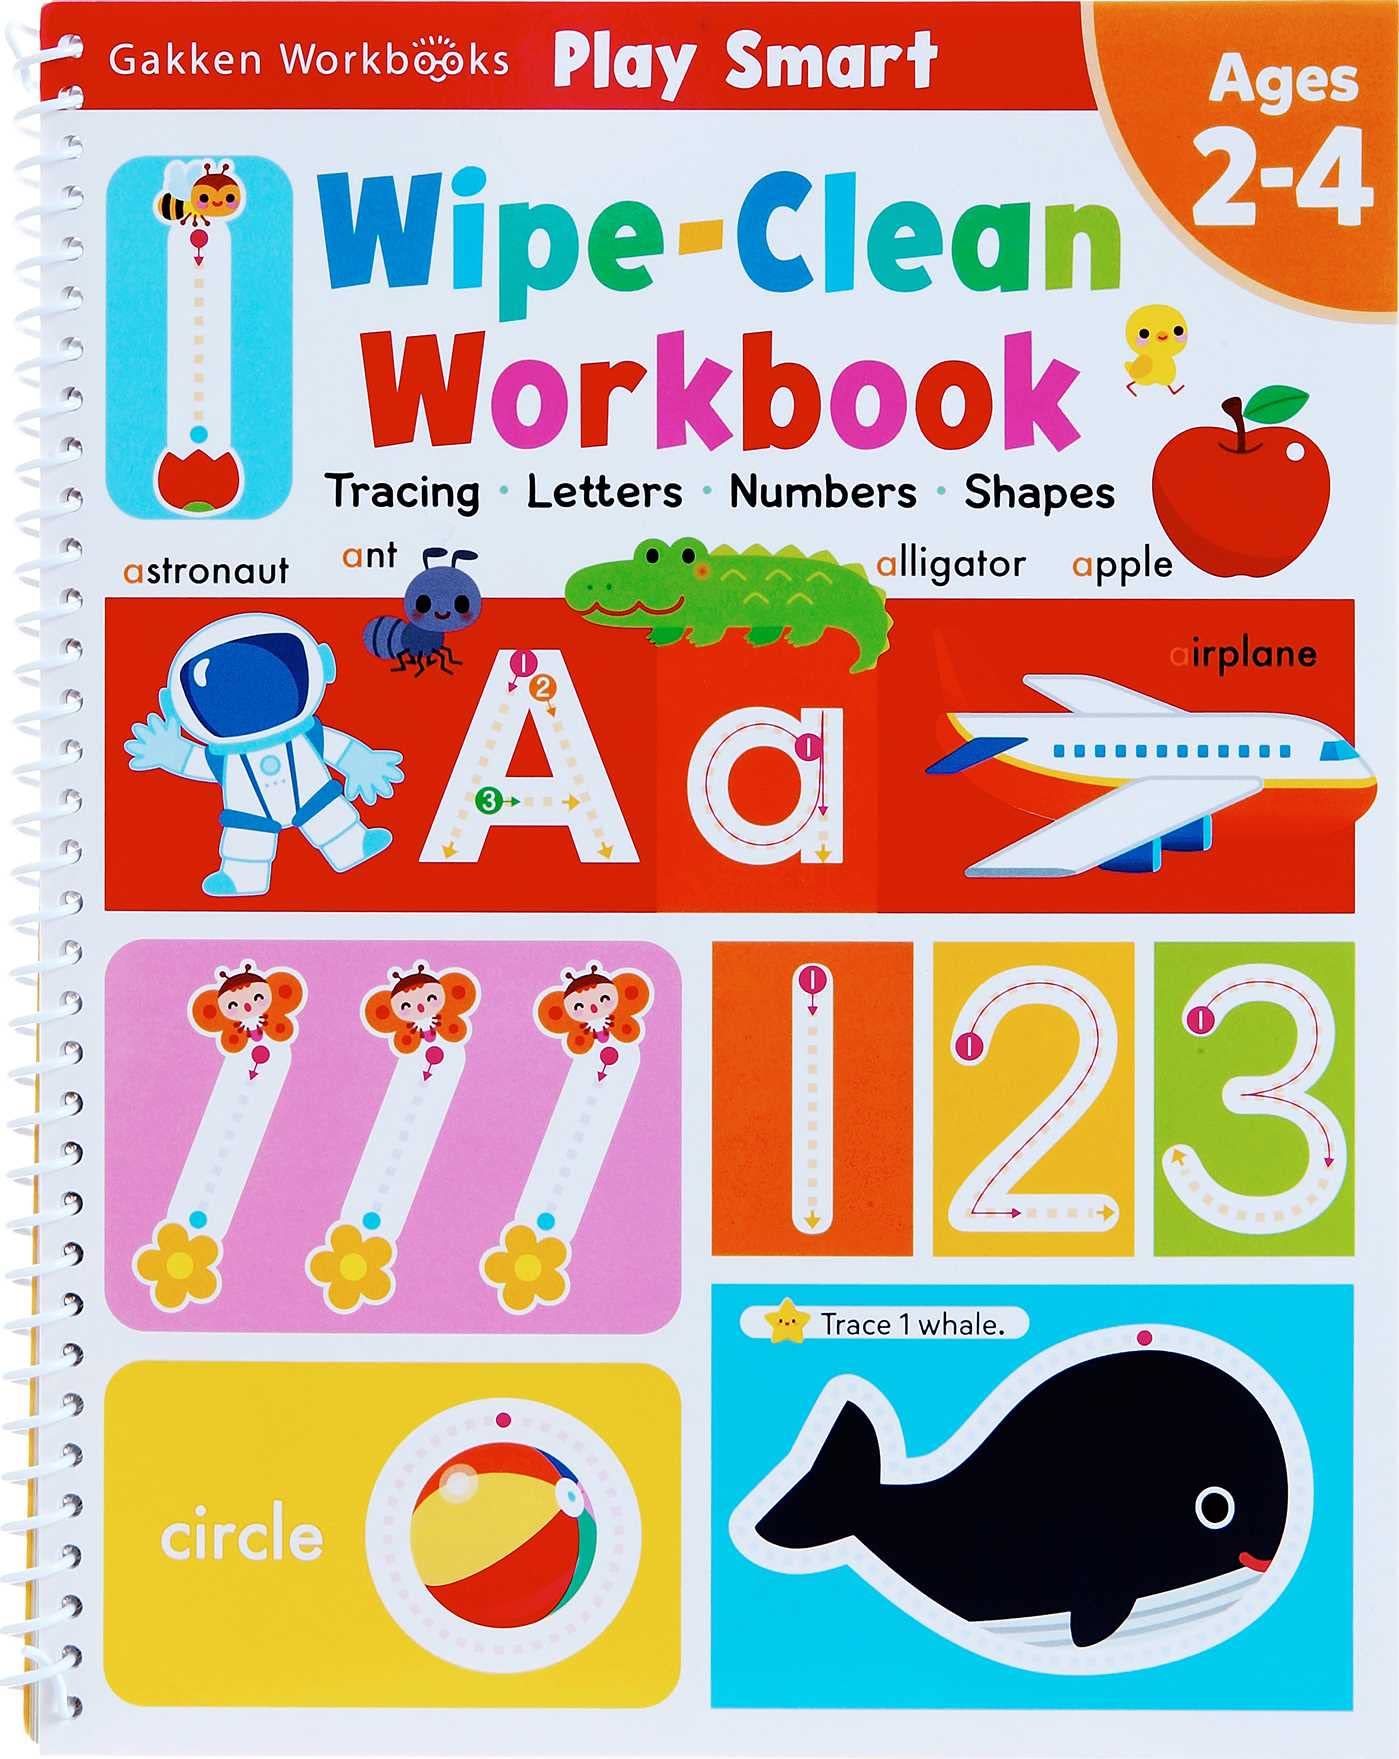 Play Smart Wipe-Clean Workbook Ages 2-4: Tracing, Letters, Numbers, Shapes: Handwriting Practice: Preschool Activity Book by Gakken Early Childhood Experts